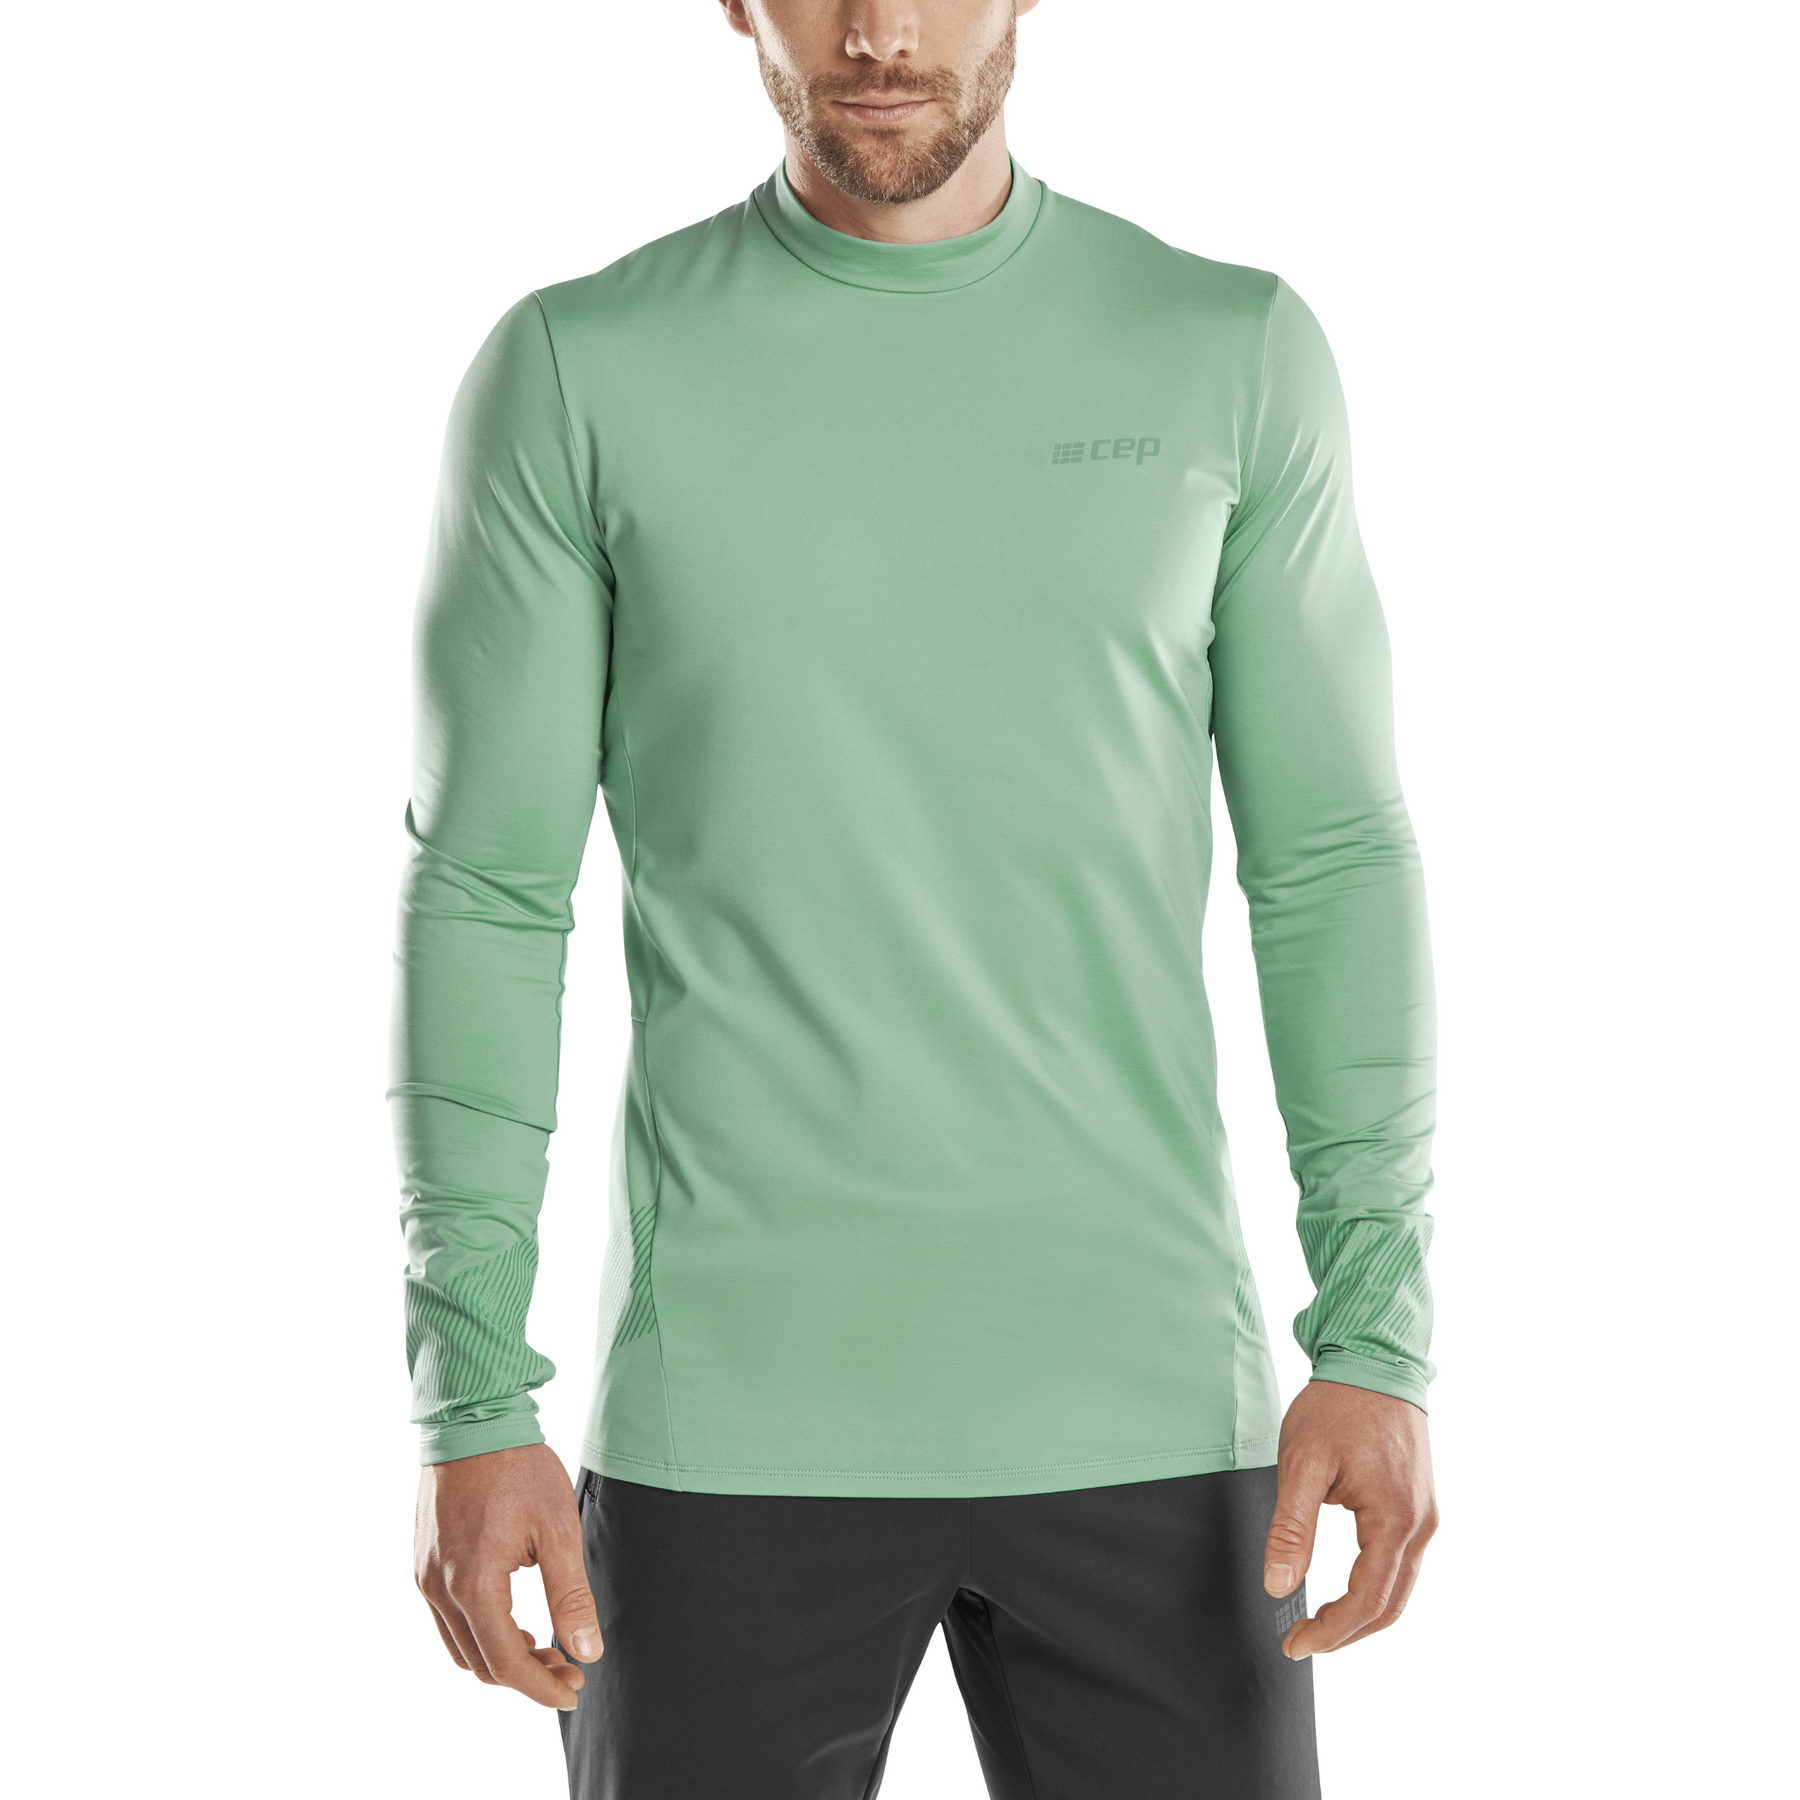 Cold Weather Shirt for Men  CEP Athletic Compression Sportswear – CEP  Compression